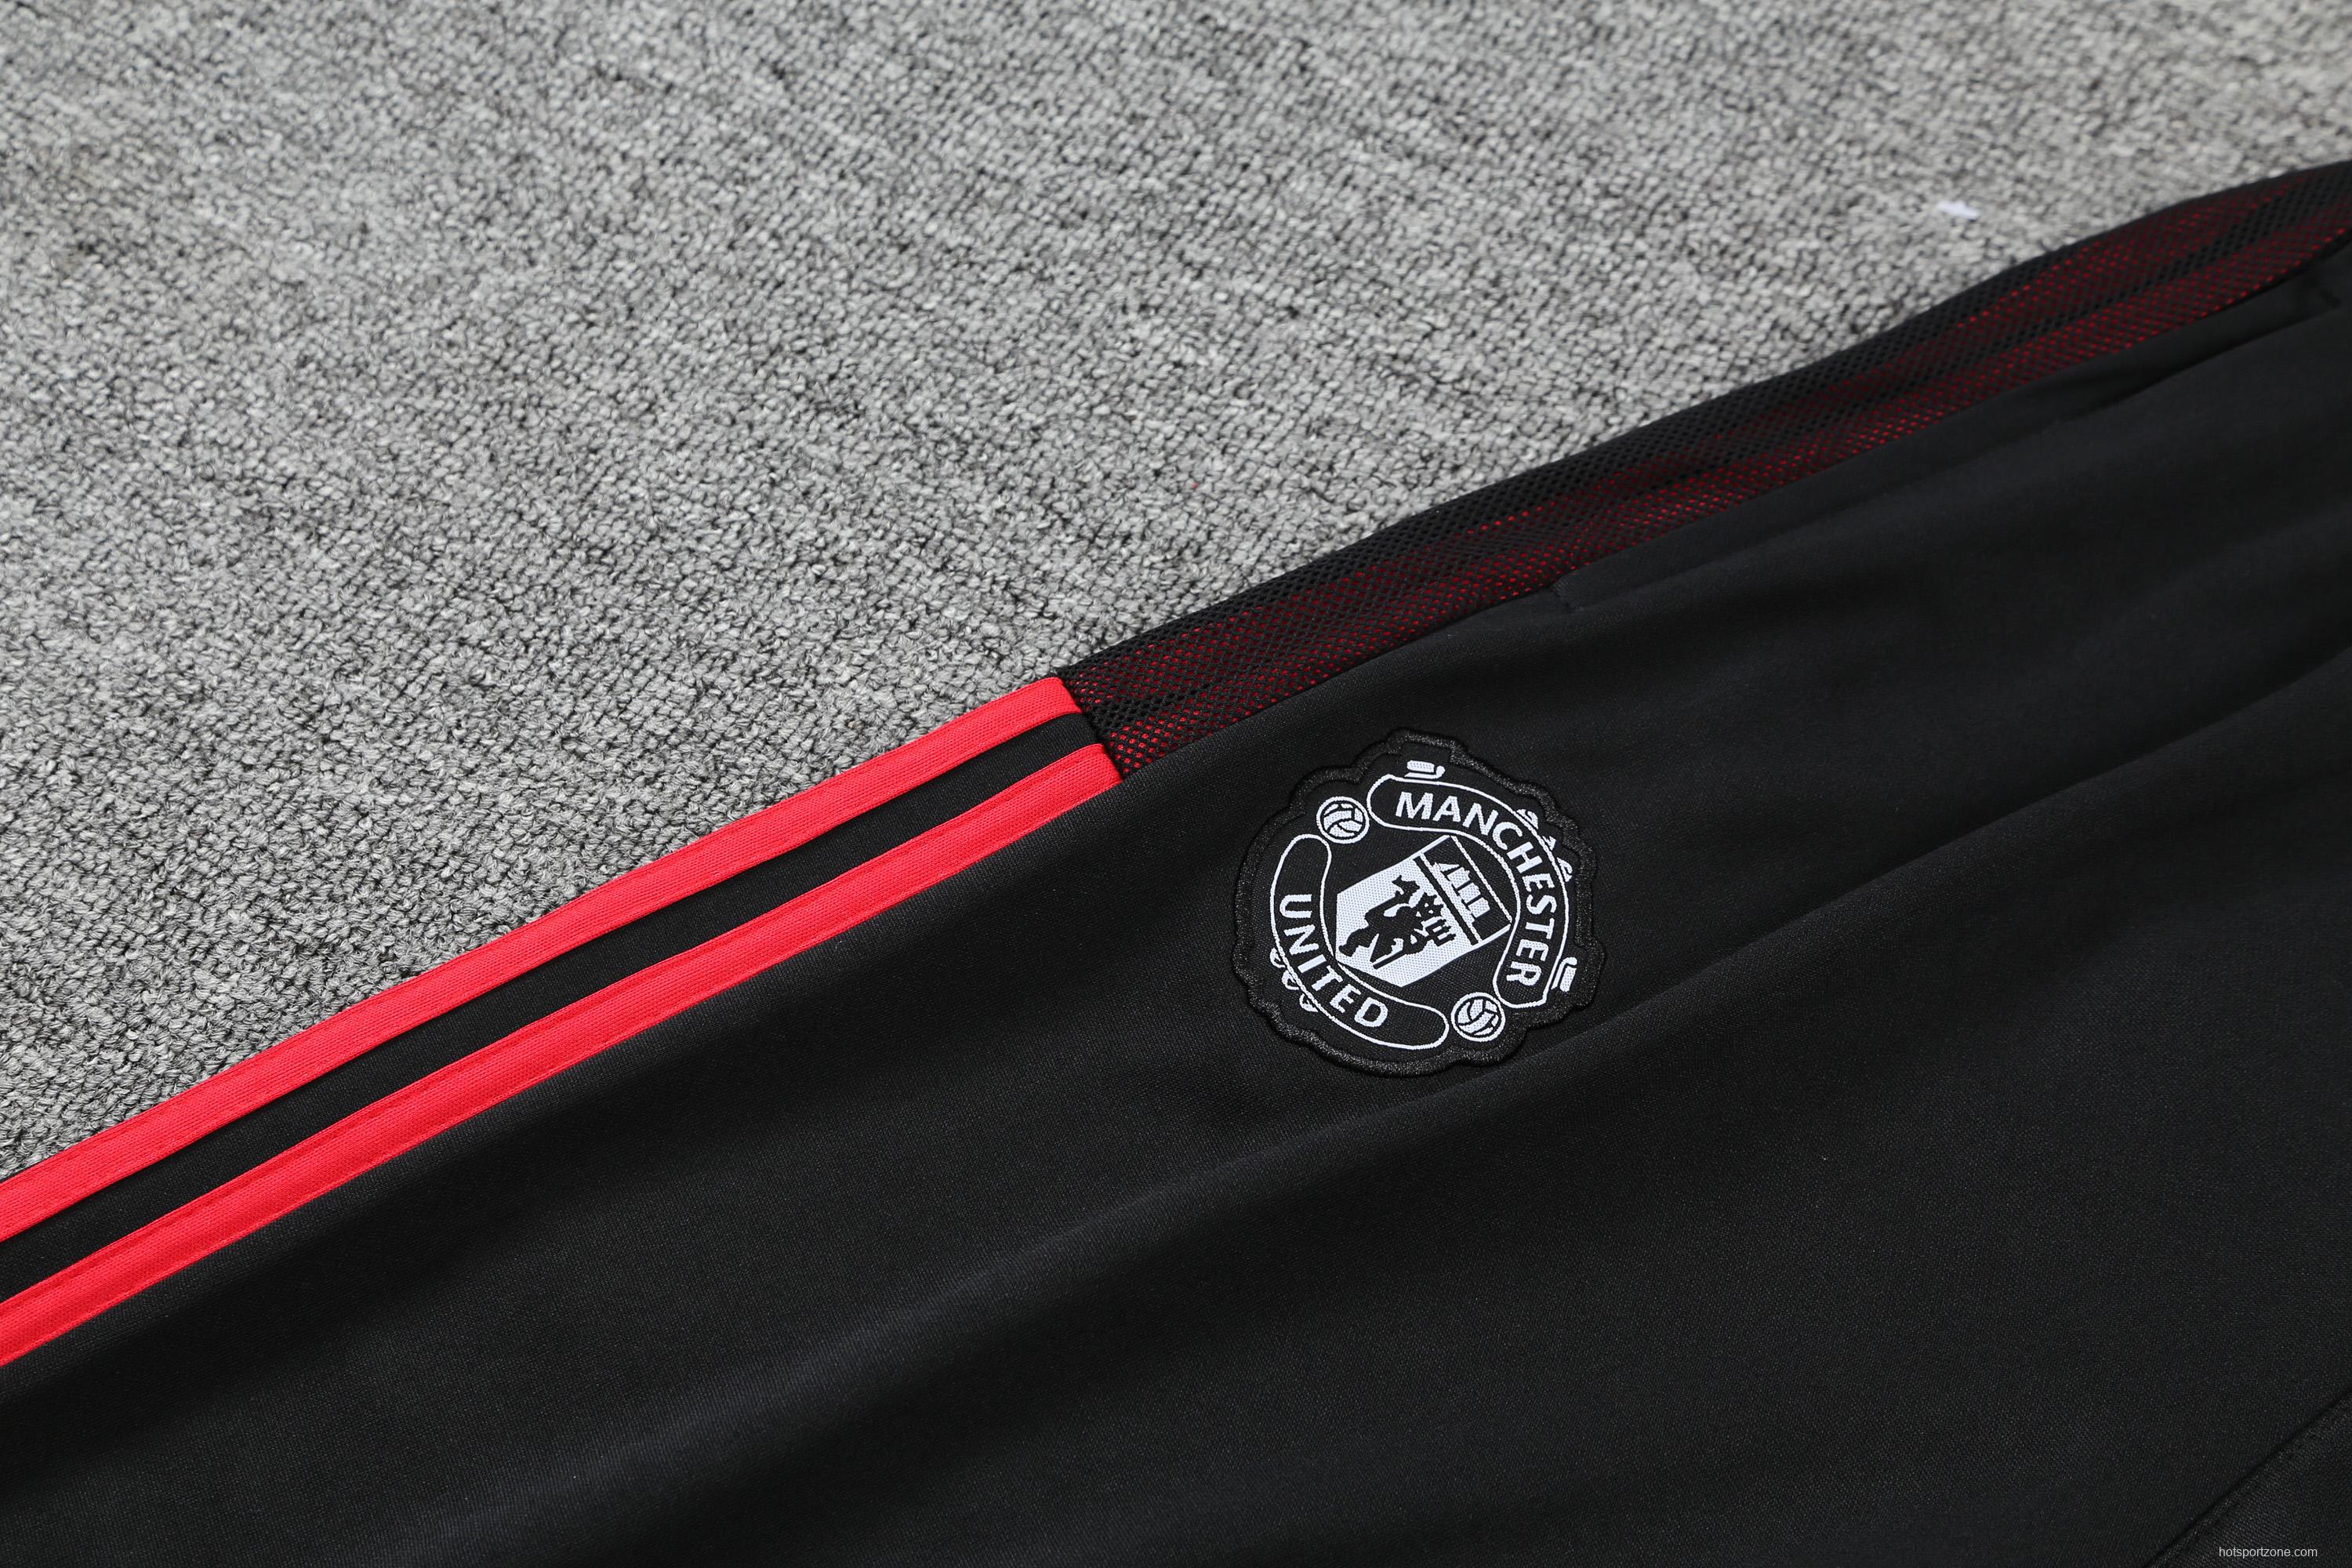 Manchester United POLO kit Black and red stripes(not supported to be sold separately)